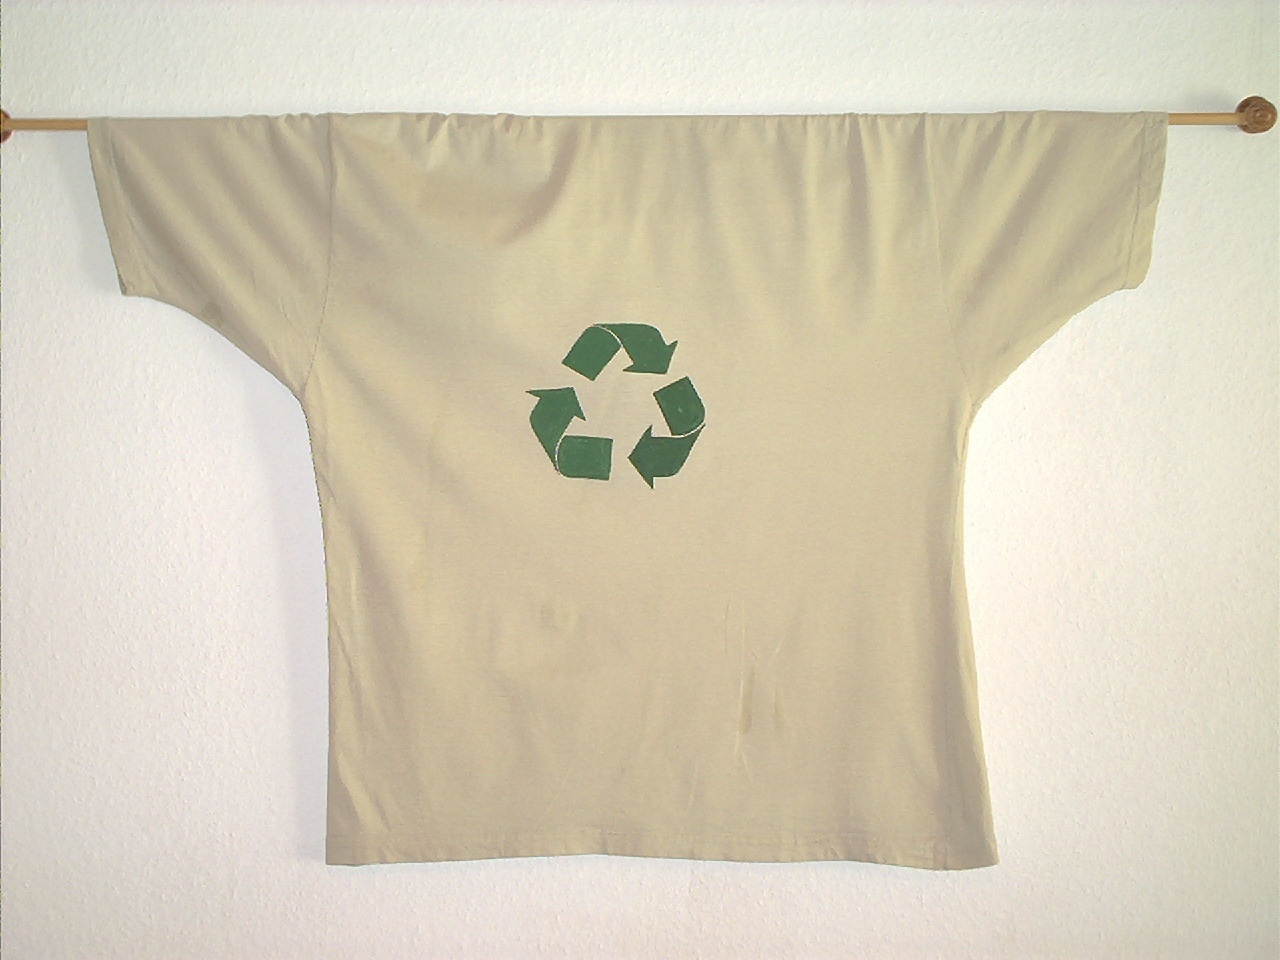 Recycling symbol back.overview